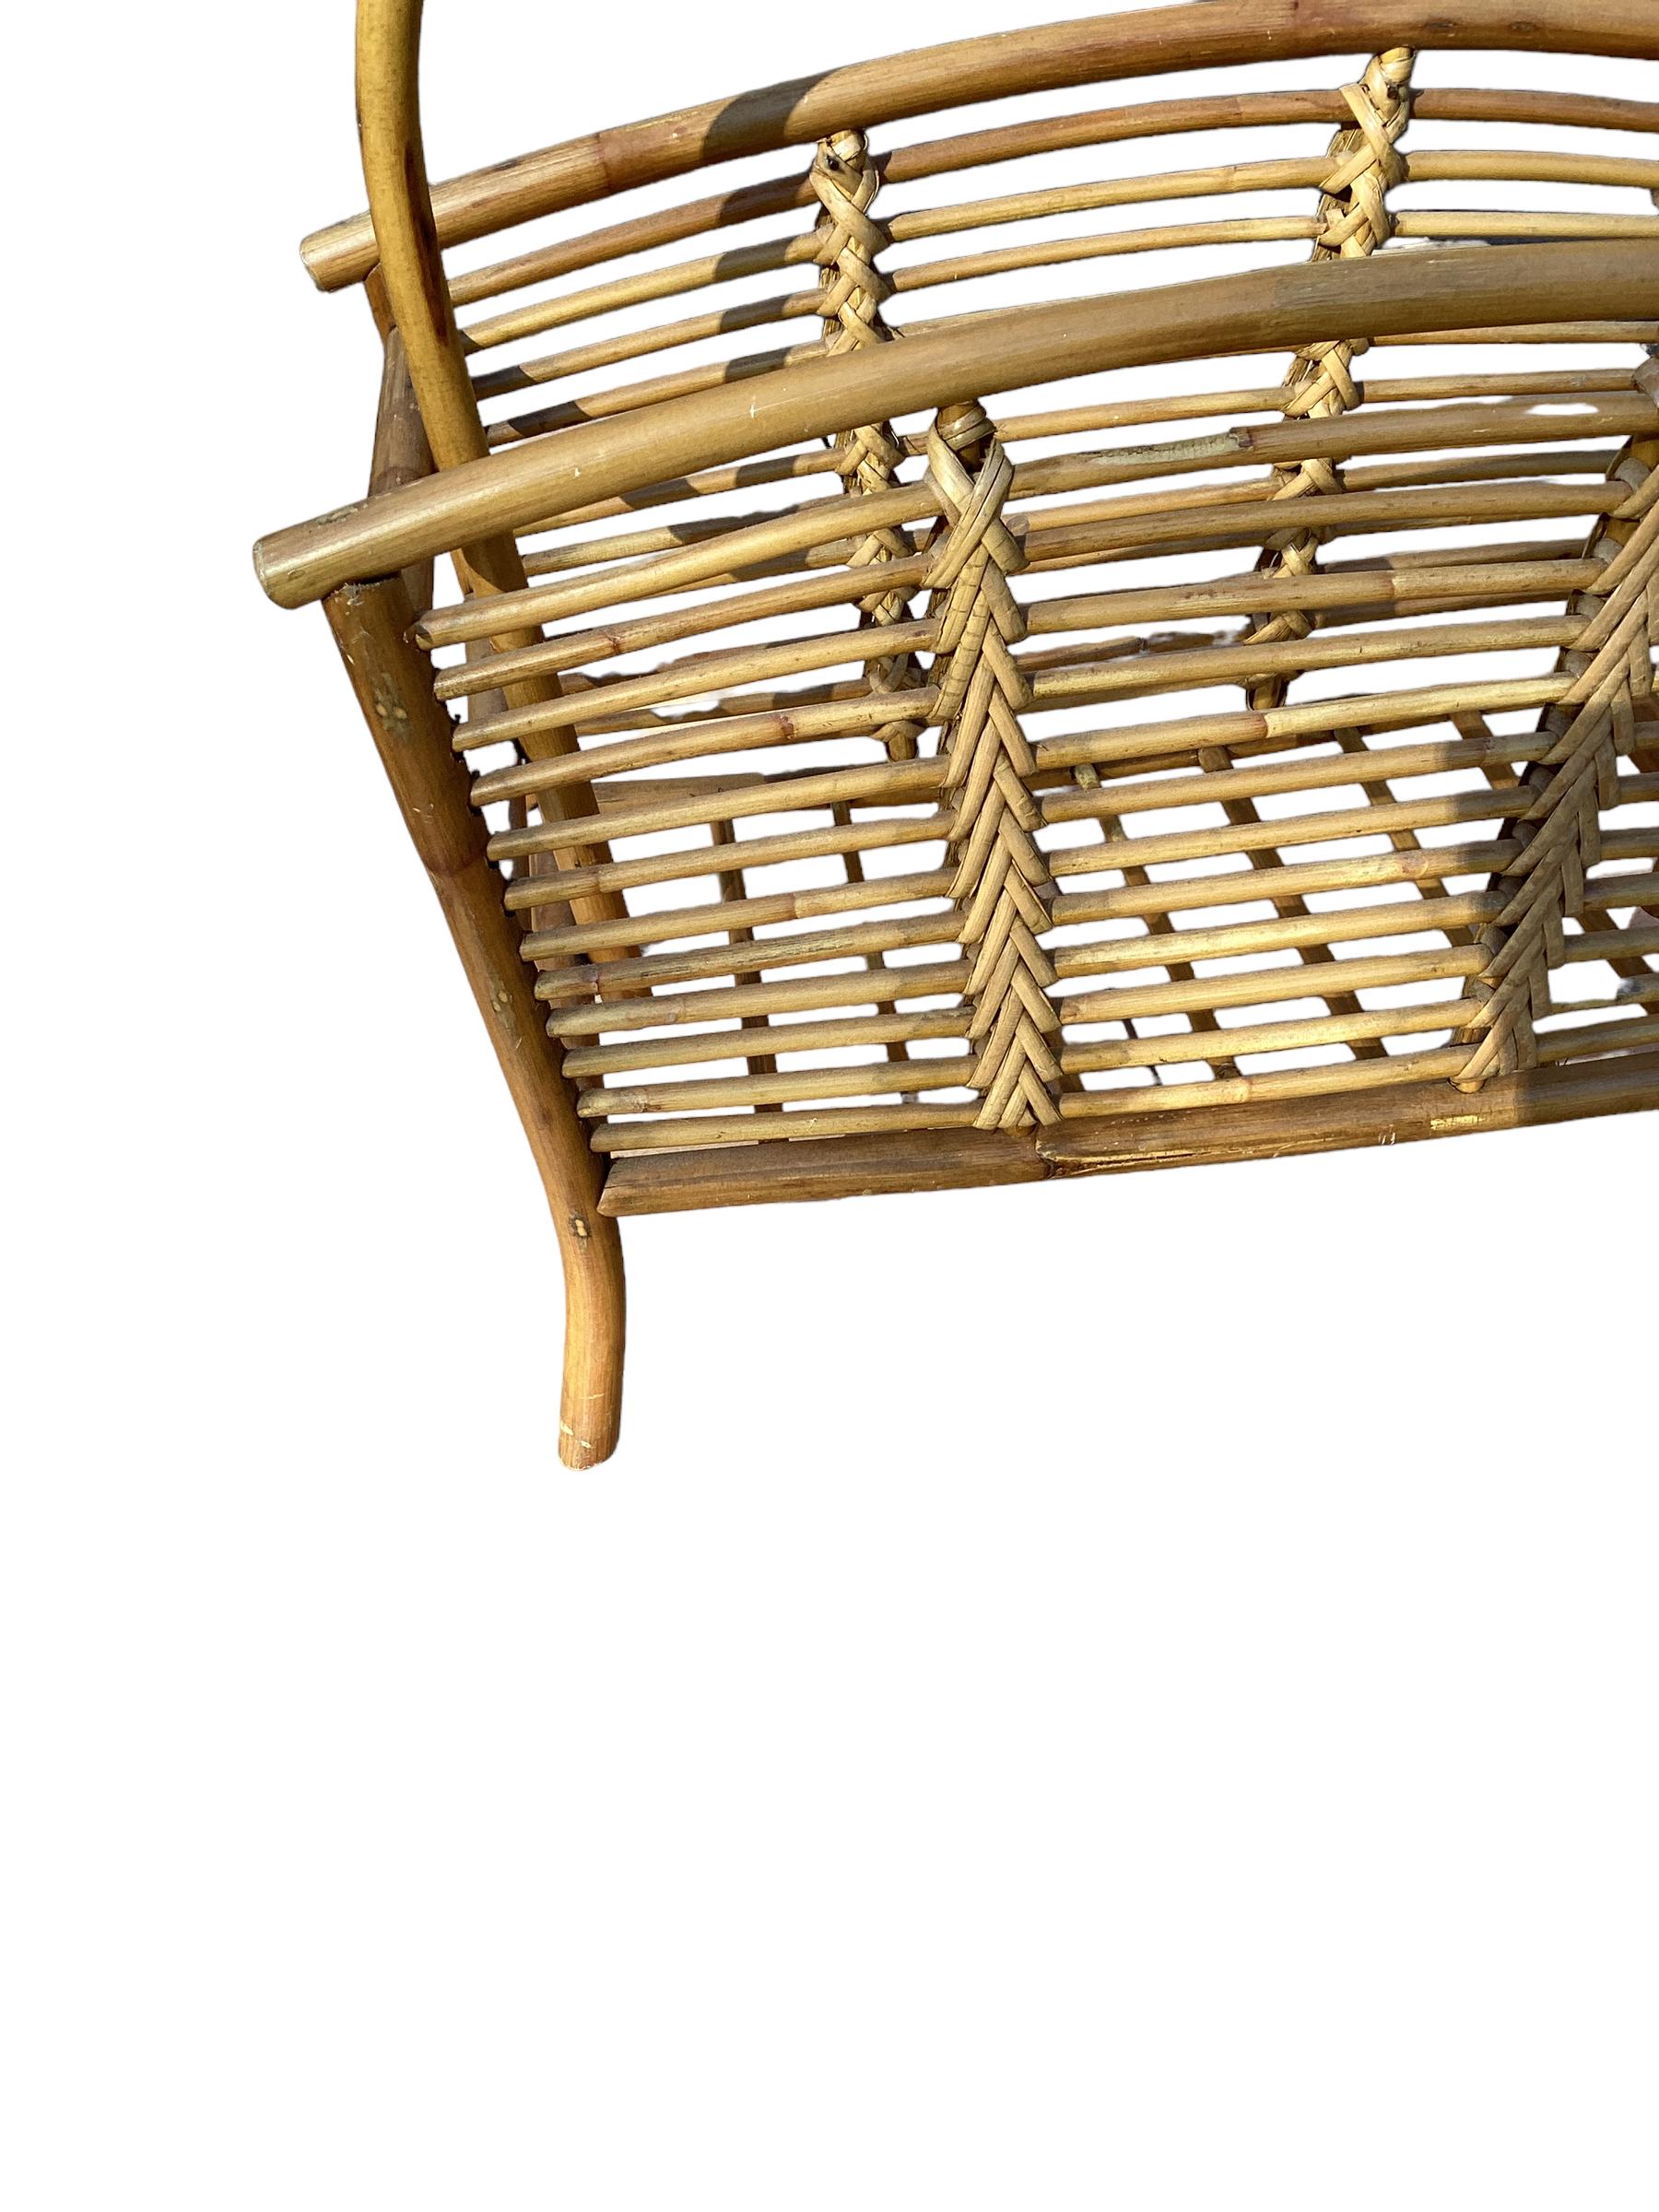 Vintage Rattan Magazine Rack In Good Condition For Sale In Chapel Hill, NC